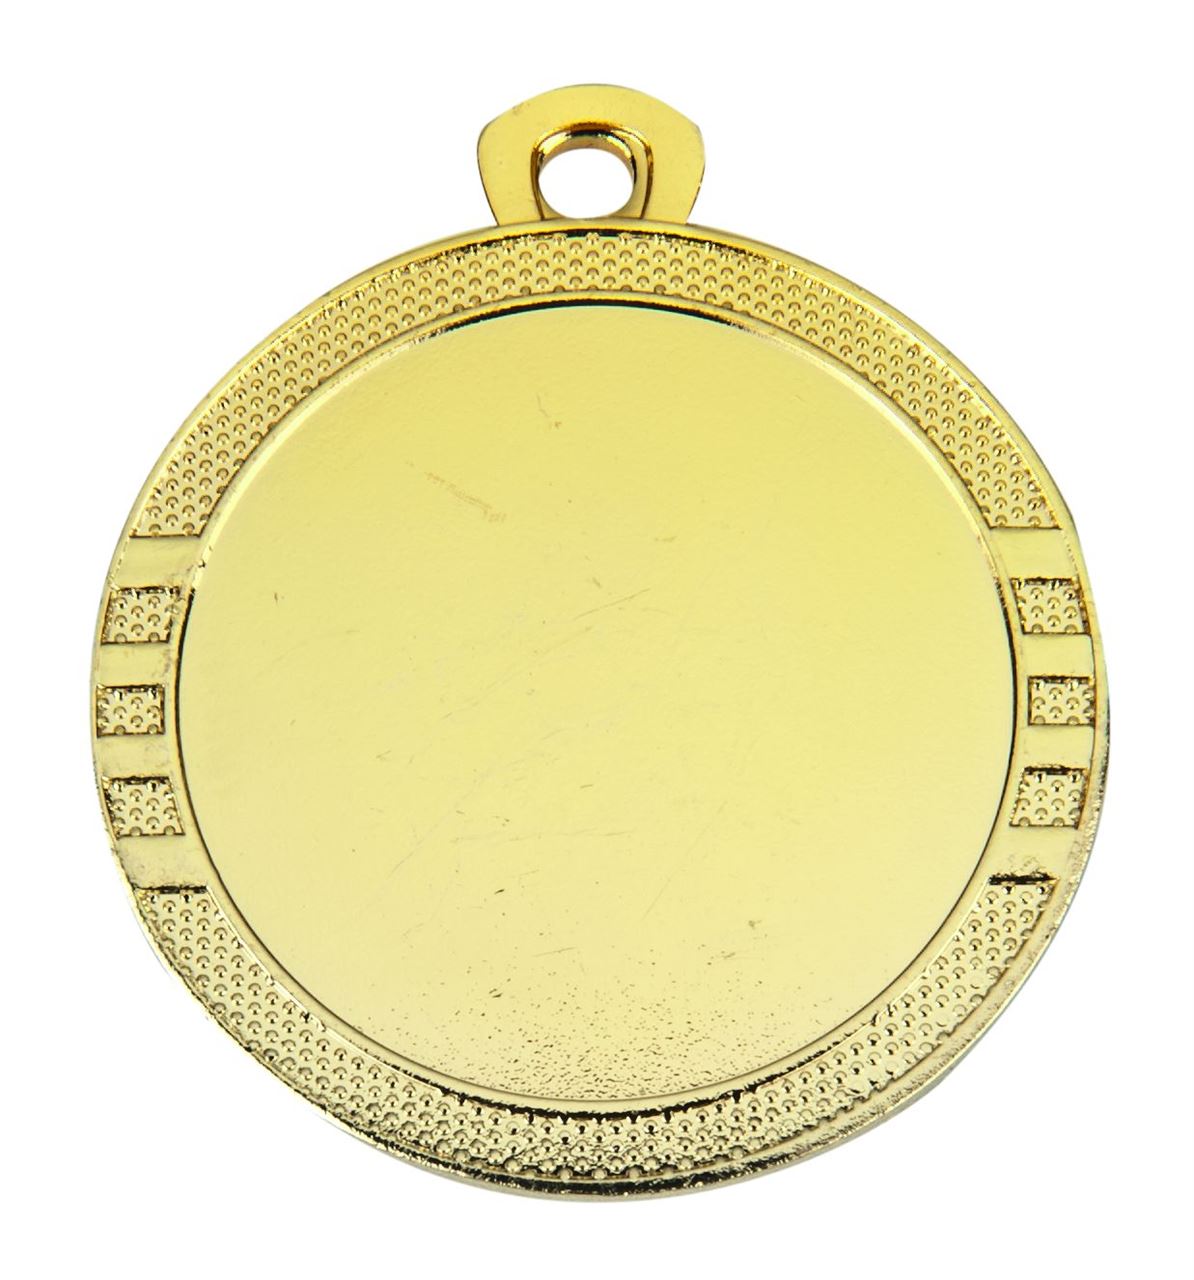 Pack of 100 Nautical Petite Medals with Ribbons & Logo Inserts (32mm) - Gold ME.064.01.AA/SET100